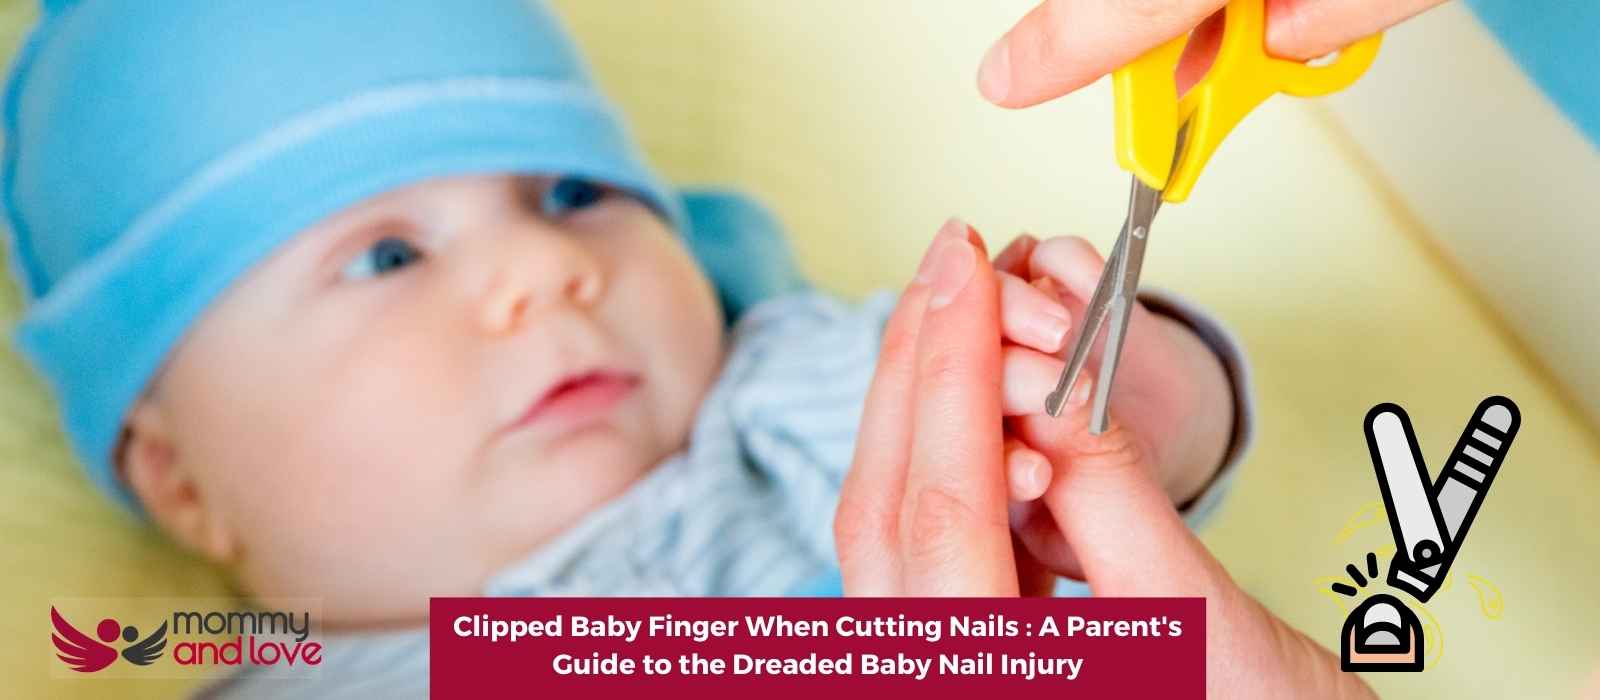 Clipped Baby Finger When Cutting Nails : A Parent’s Guide to the Dreaded Baby Nail Injury